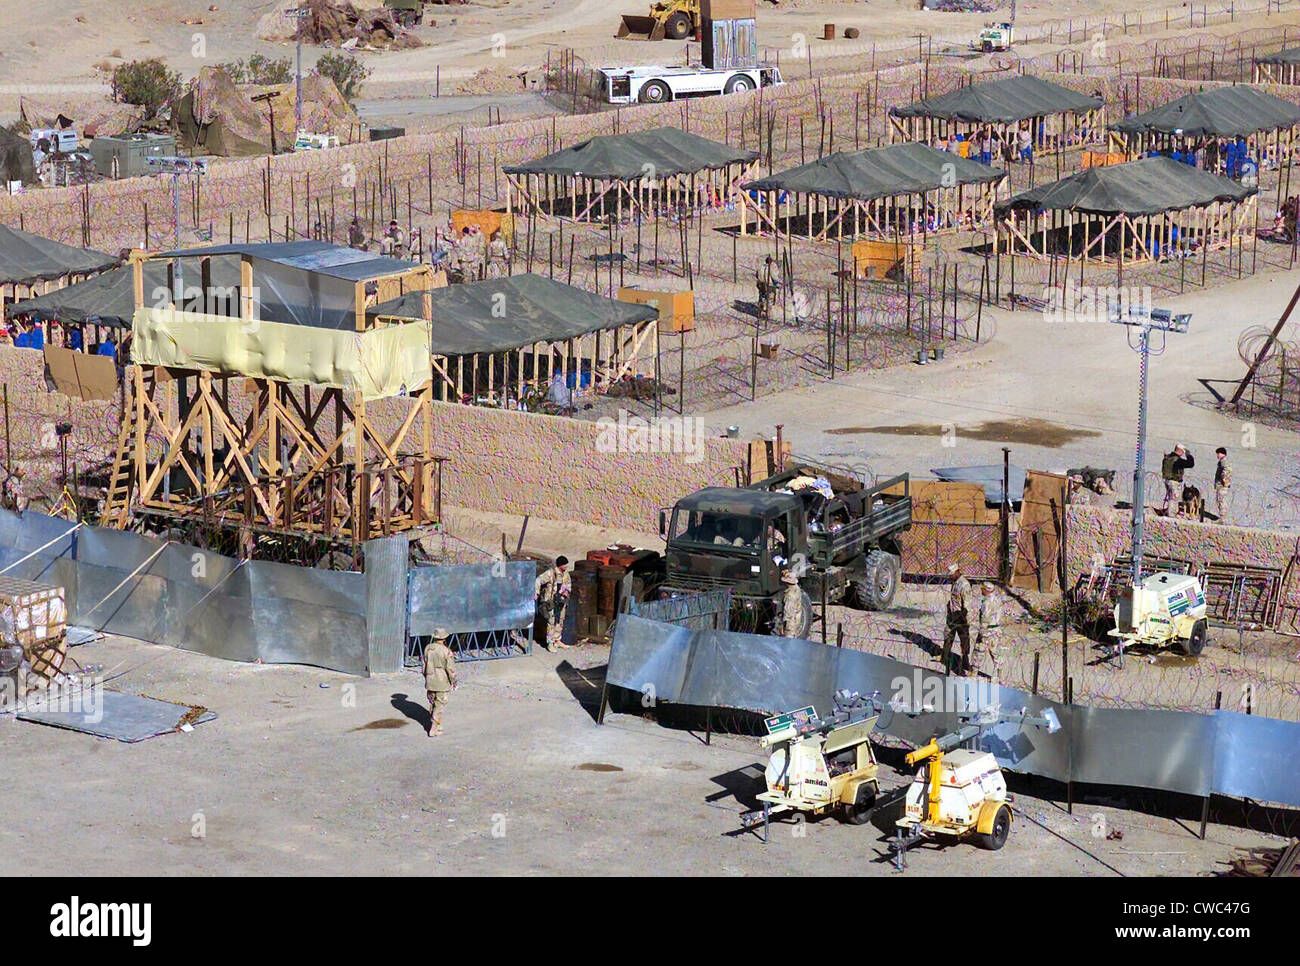 Detainment facility built by U.S. Marines as seen from the air traffic control tower of Kandahar International Airport Stock Photo